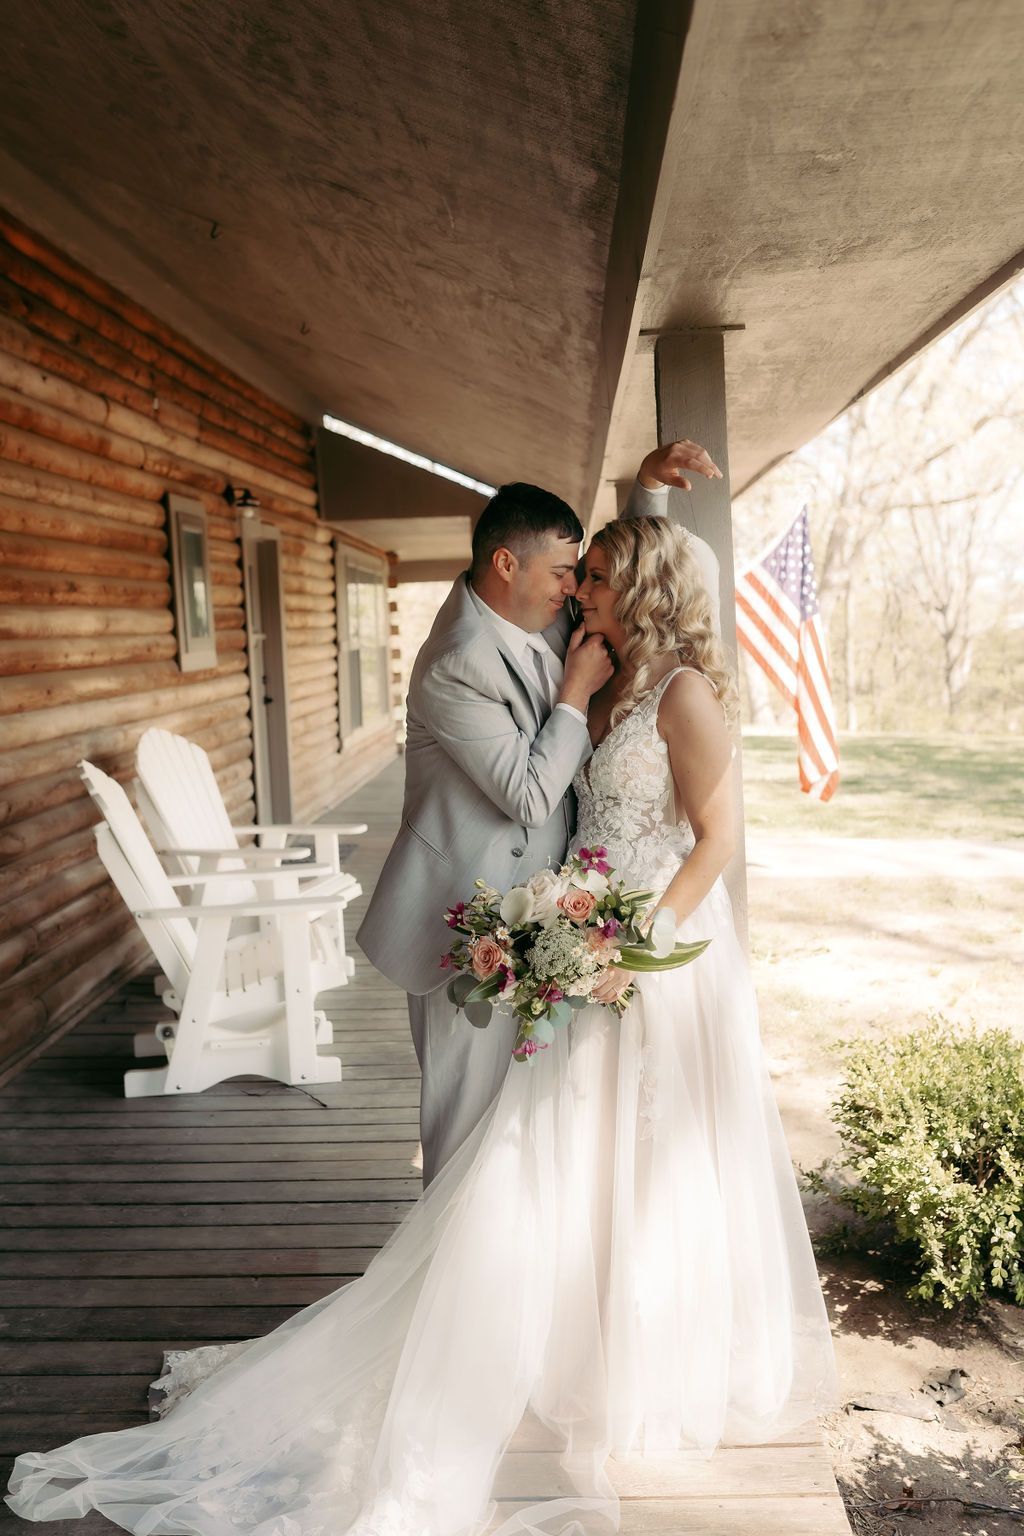 Celebrate Your Love at the Champagne Barn. We Are Honored to Host Your Wedding in Mid-Missouri.